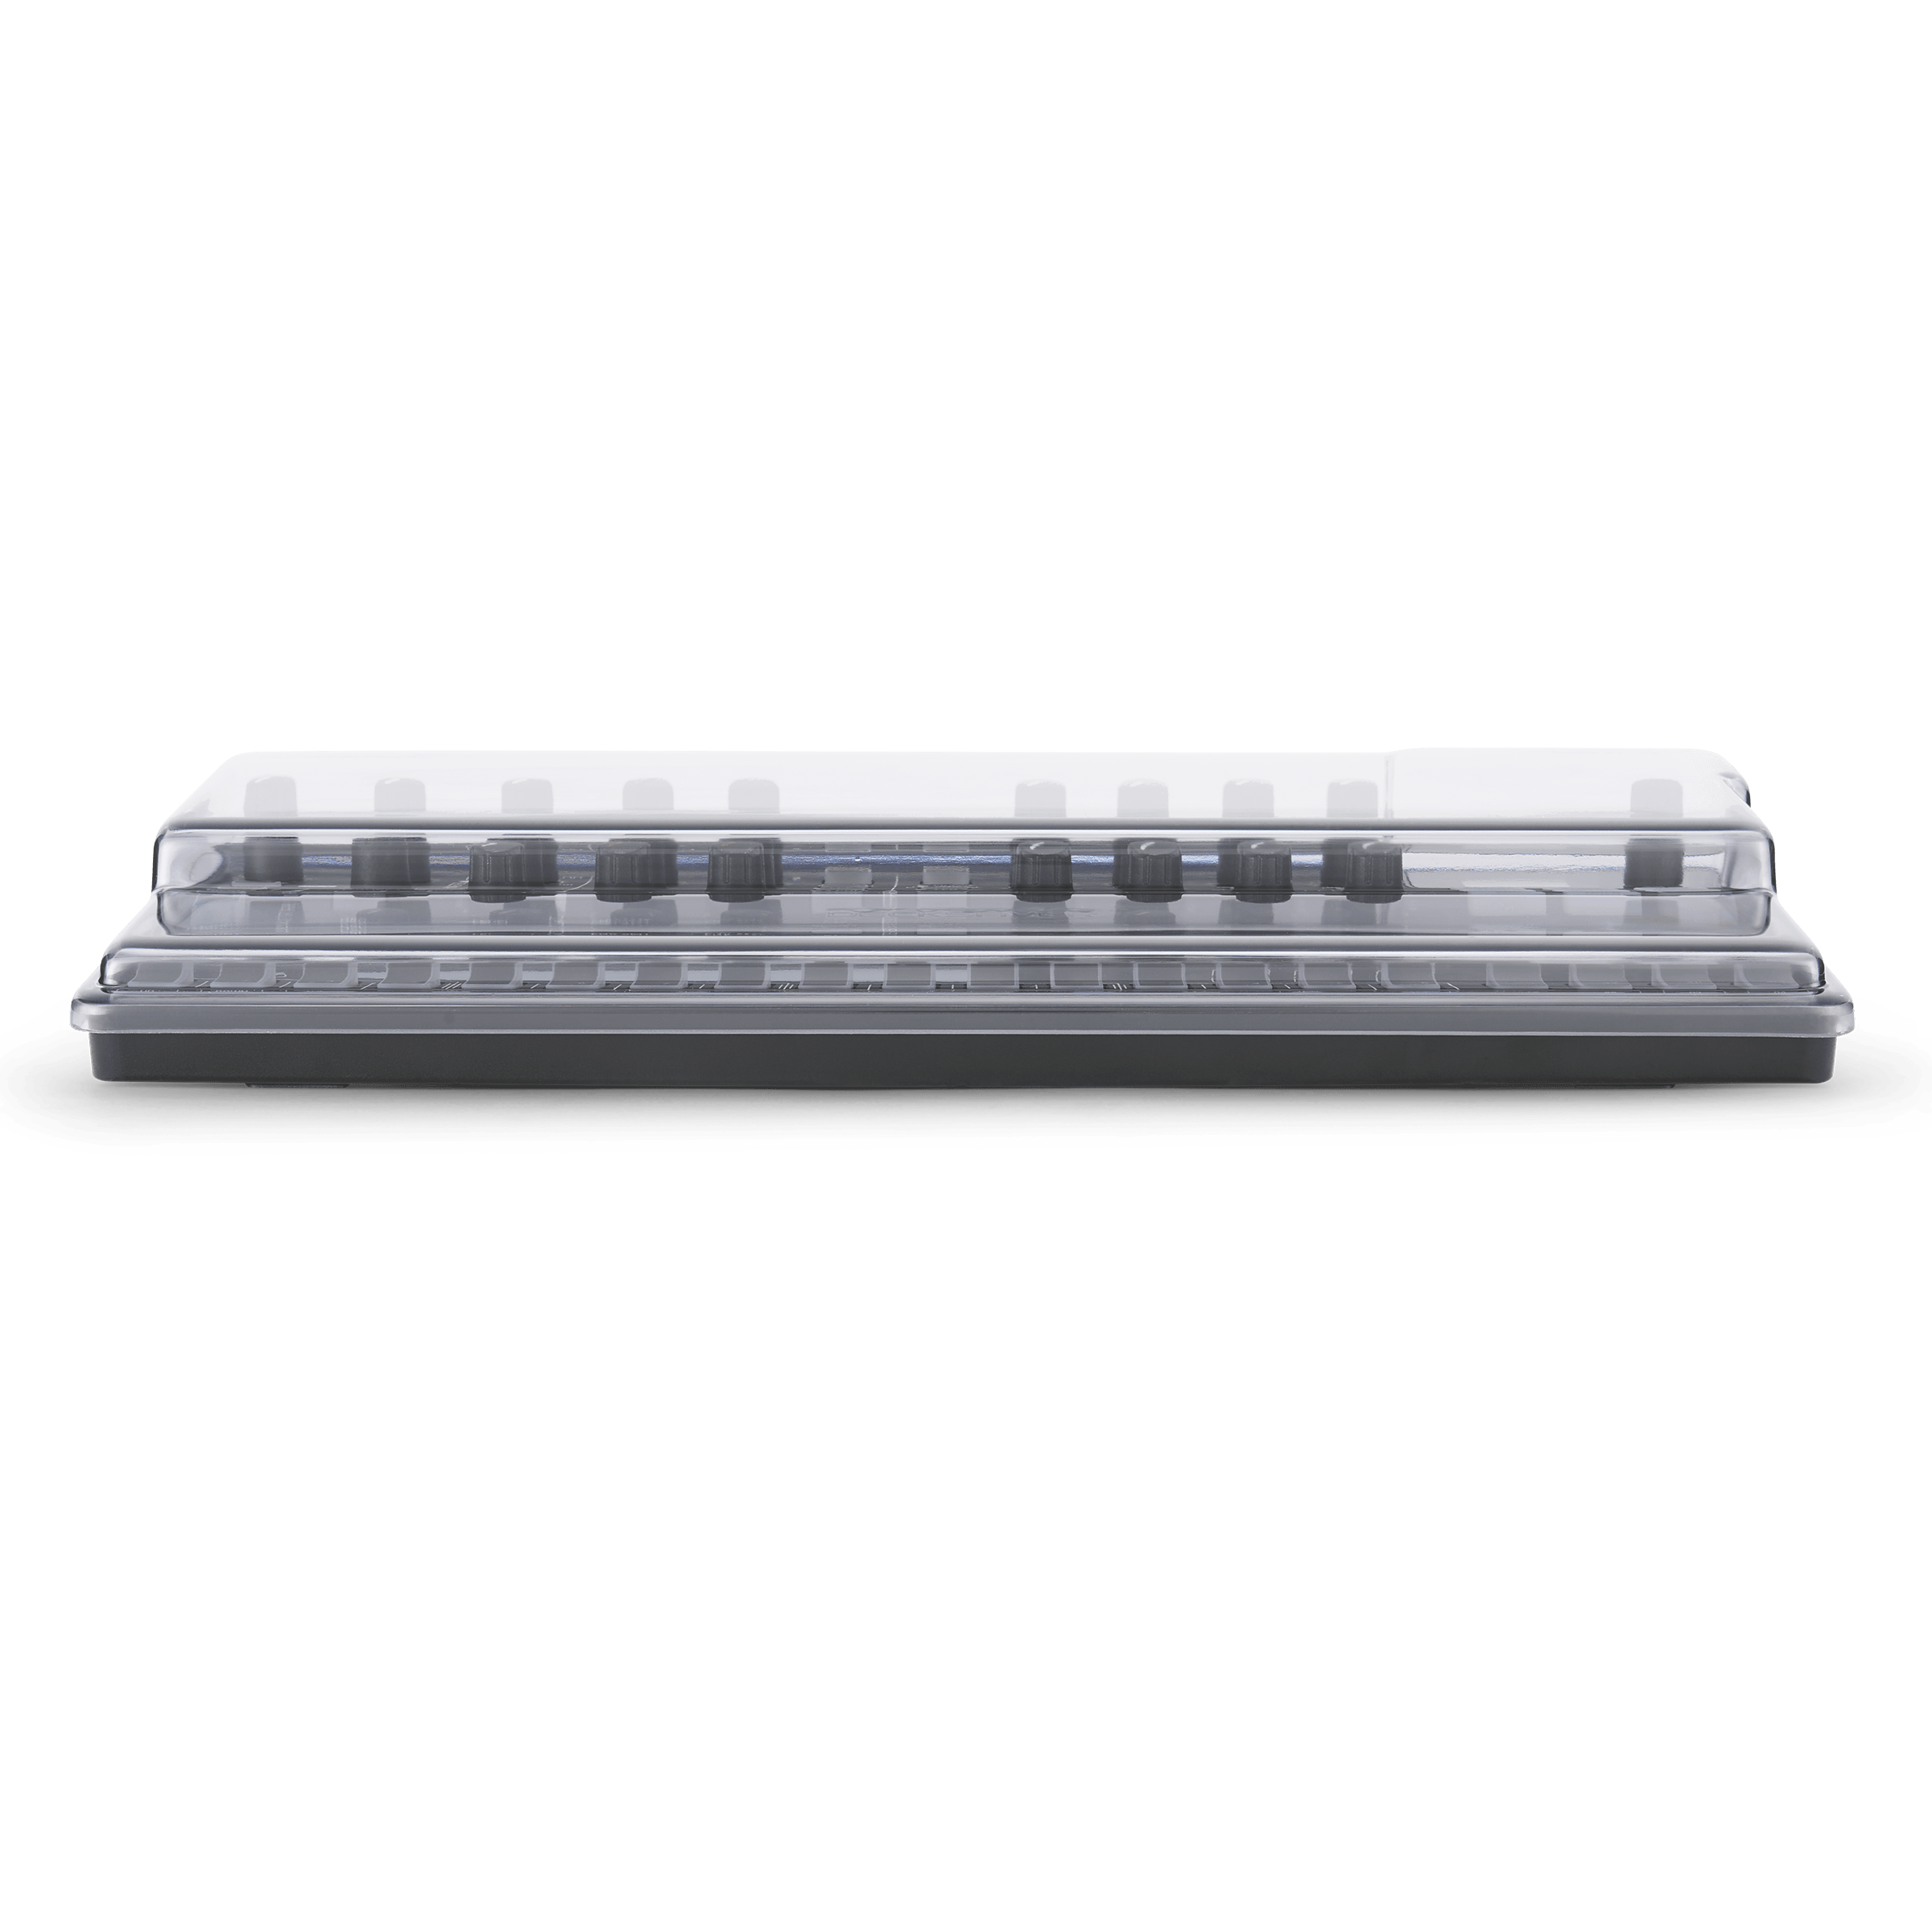 Decksaver IK Multimedia UNO Synth PRO X cover - DY Pro Audio